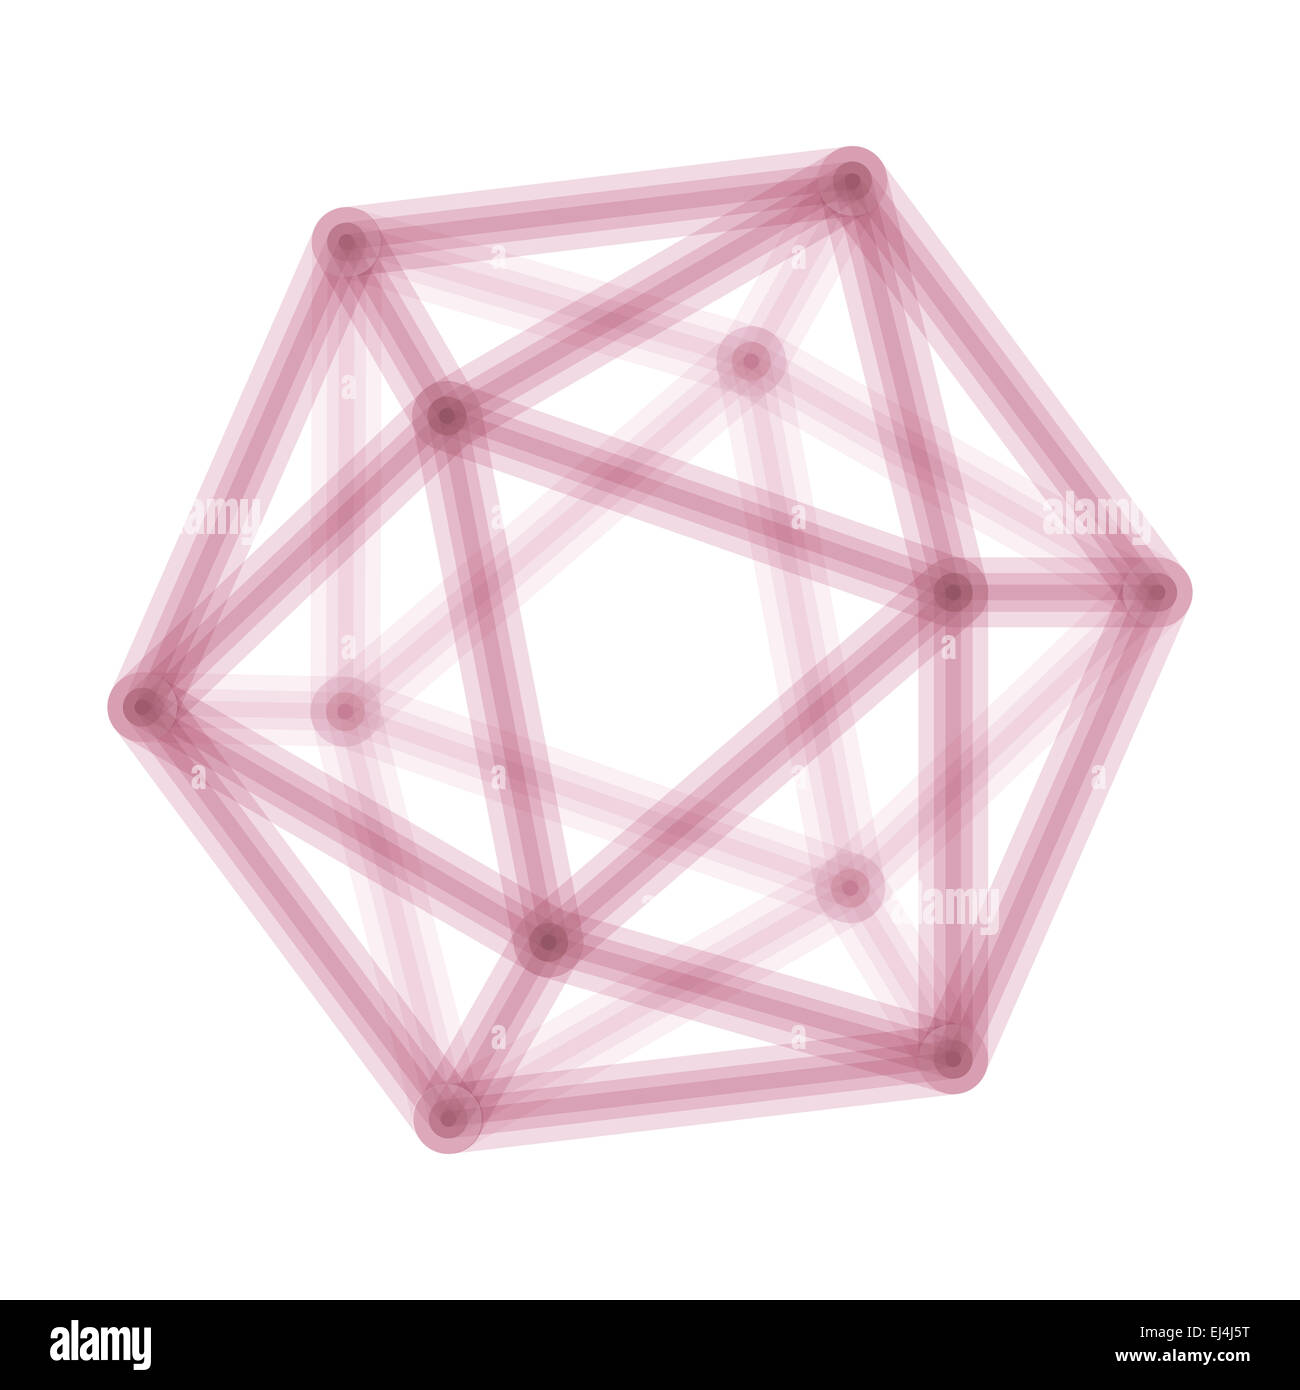 icosahedron's edges connected in overlapping transparency Stock Photo